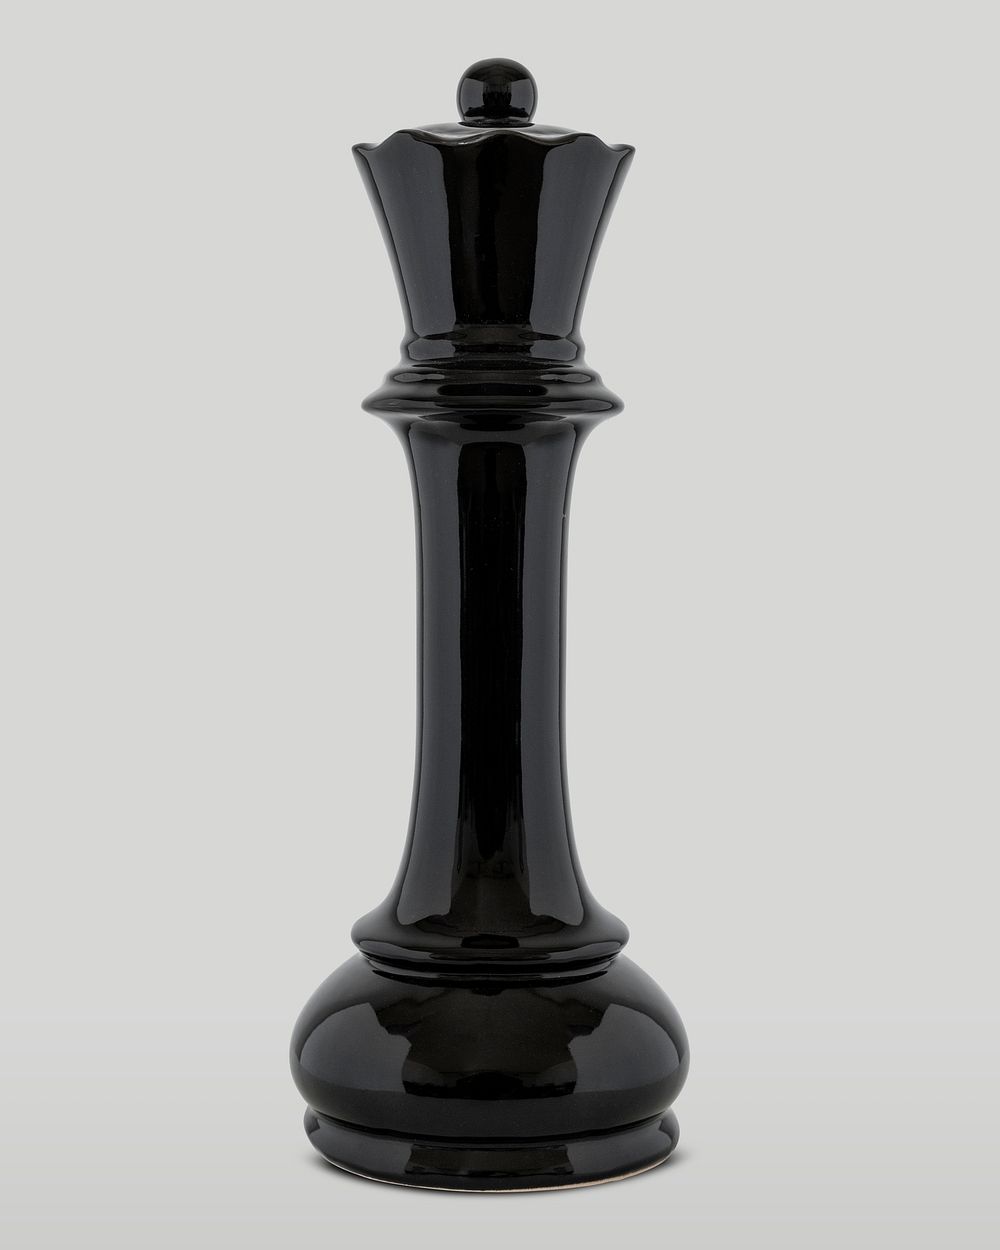 Black queen chess piece on off white background